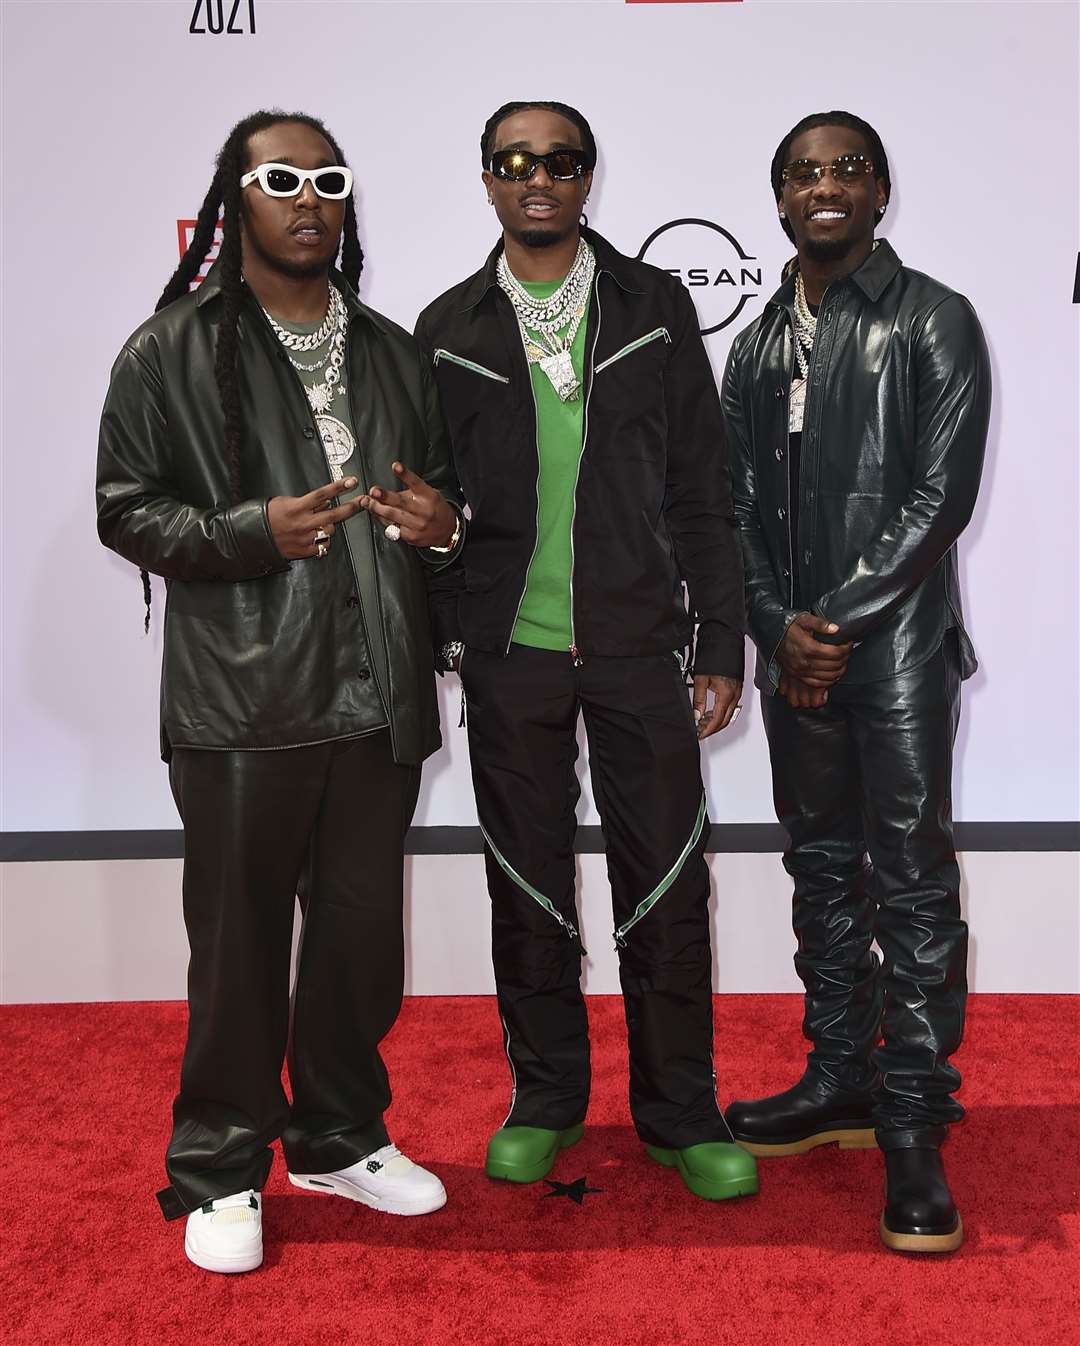 Takeoff (left) was part of the Atlanta-based group Migos alongside his uncle Quavo and cousin Offset (Jordan Strauss/Invision/AP File)